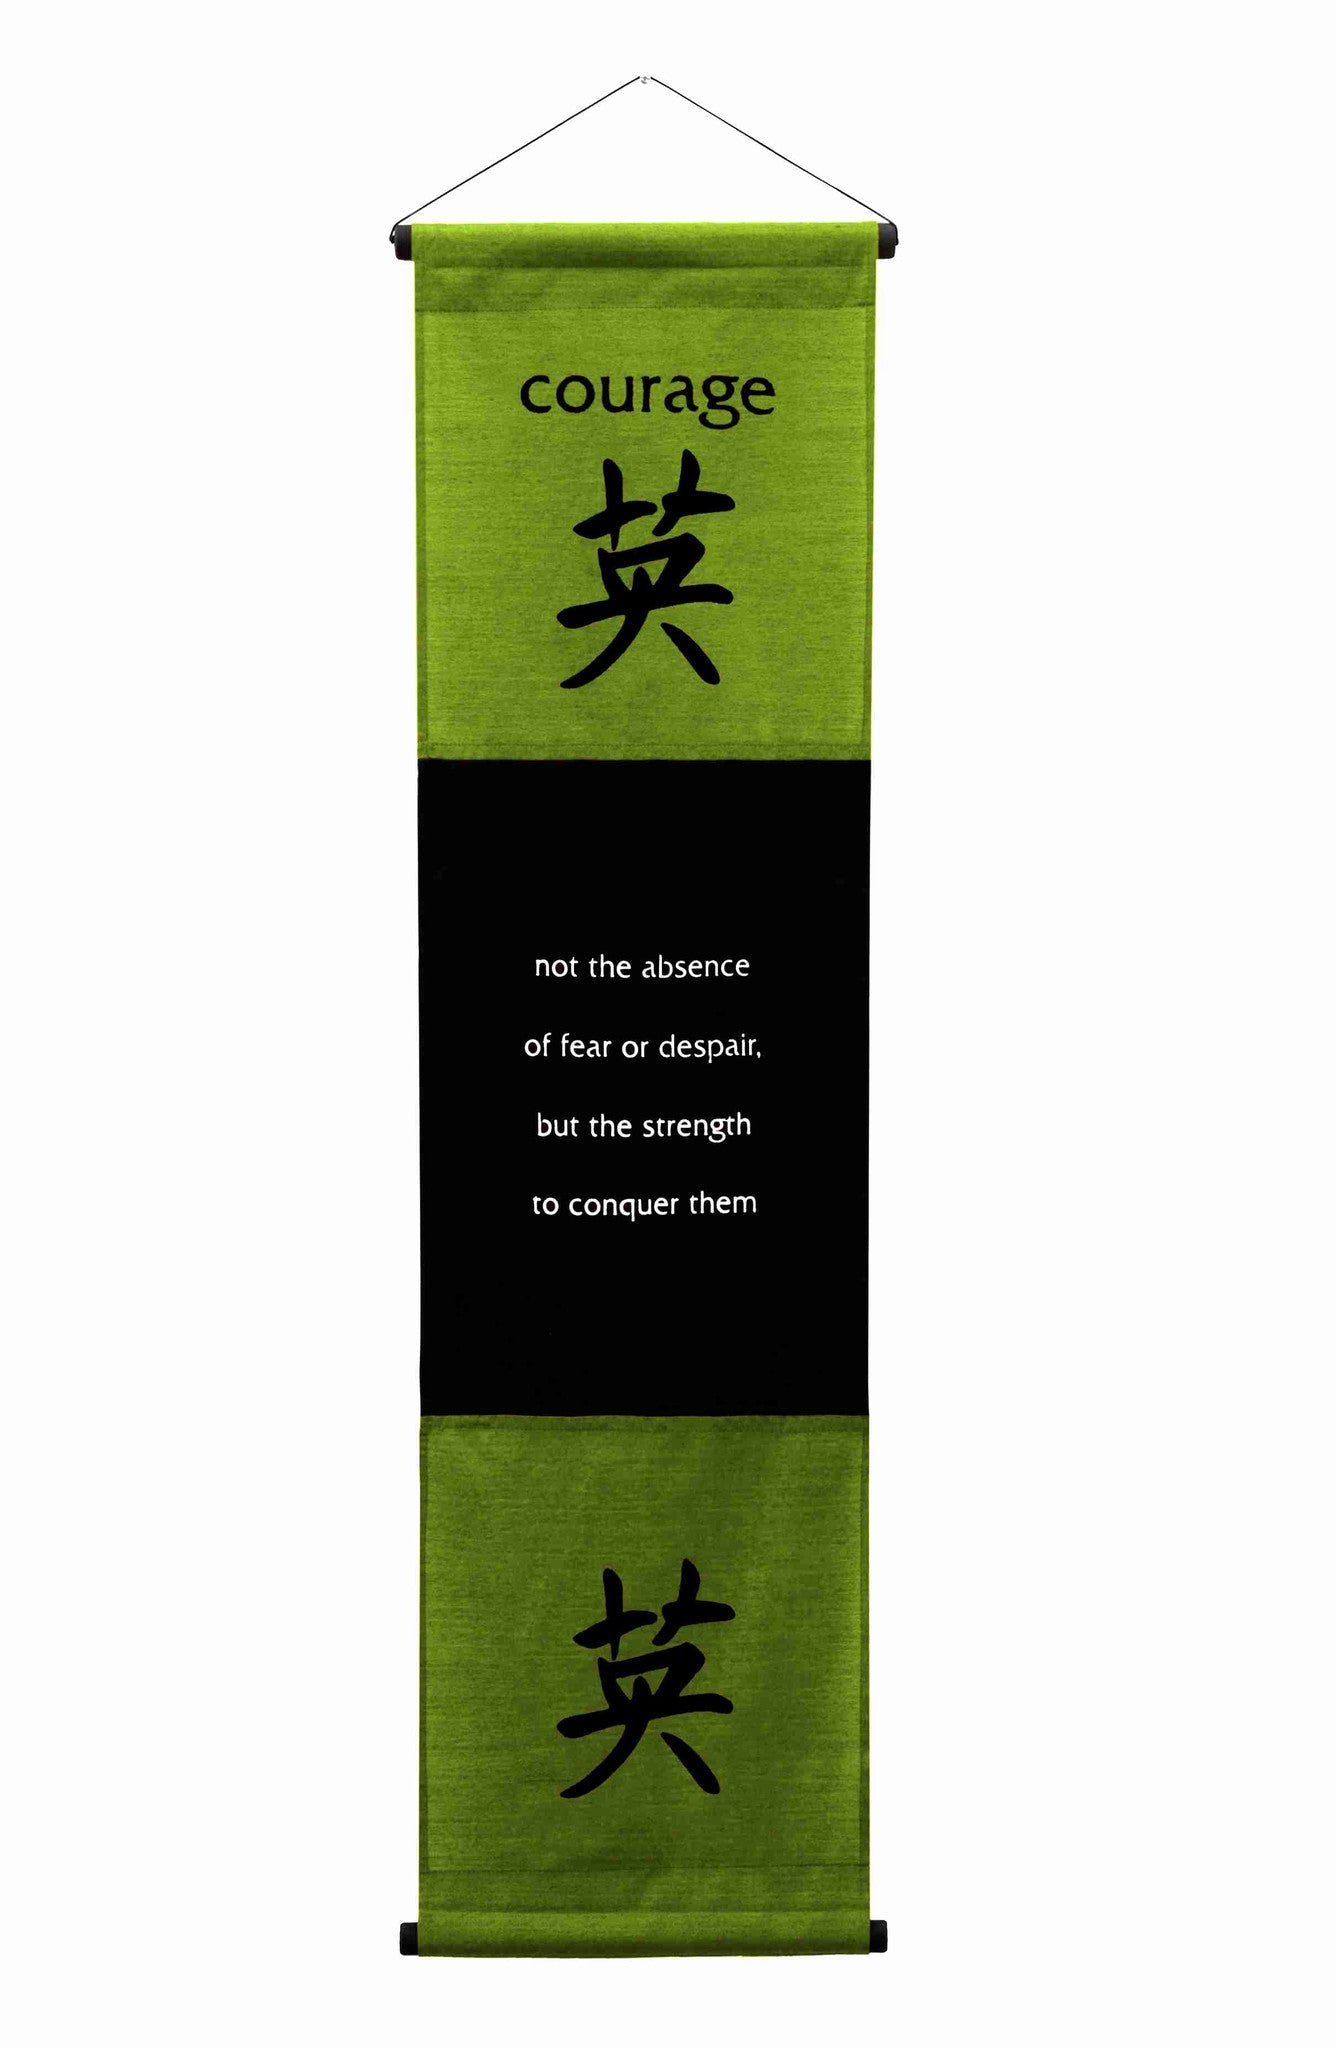 Inspirational Wall Decor "Courage" Banner Large, Inspiring Quote Wall Hanging Scroll, Affirmation Motivational Uplifting Art Decoration, Thought Saying Tapestry green